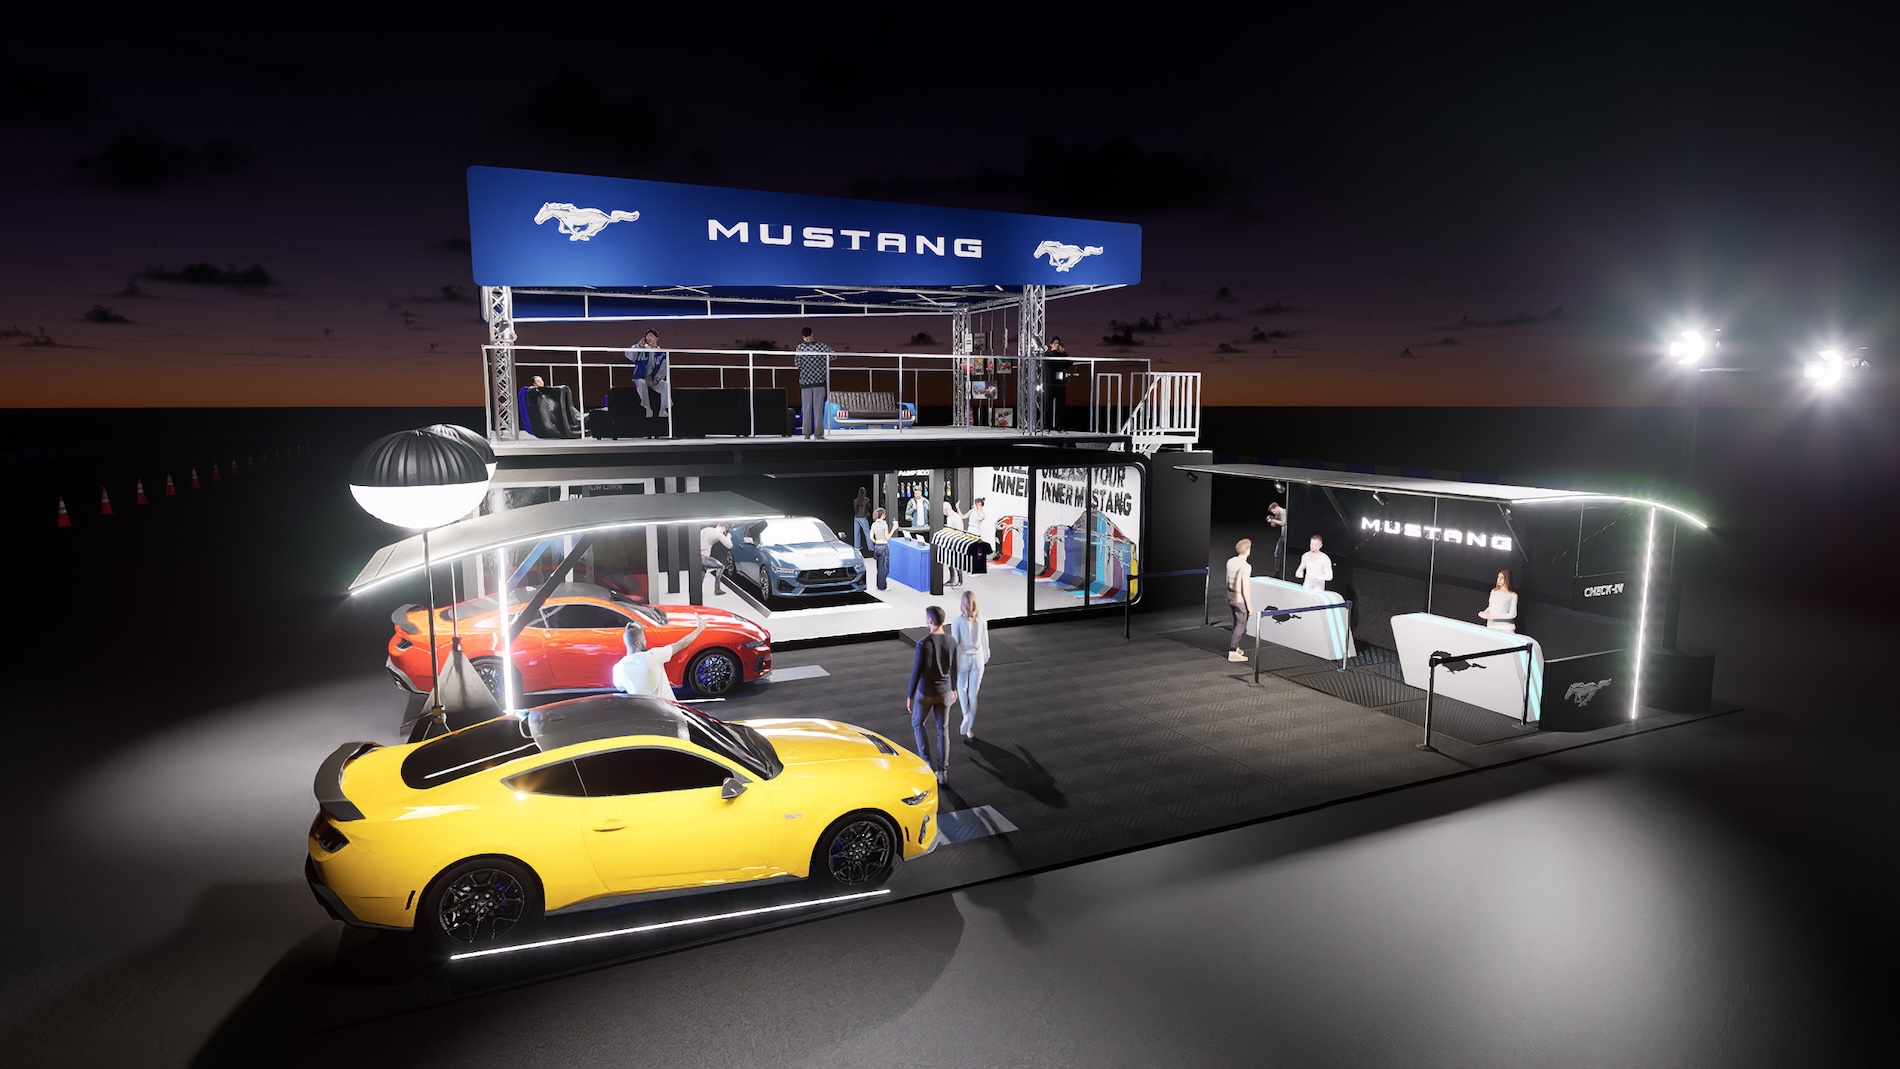 S650 Mustang "Mustang Unleashed" national demo tour announced to celebrate Mustang's 60th Birthday. Registration now open Mustang Unleashed Render 0